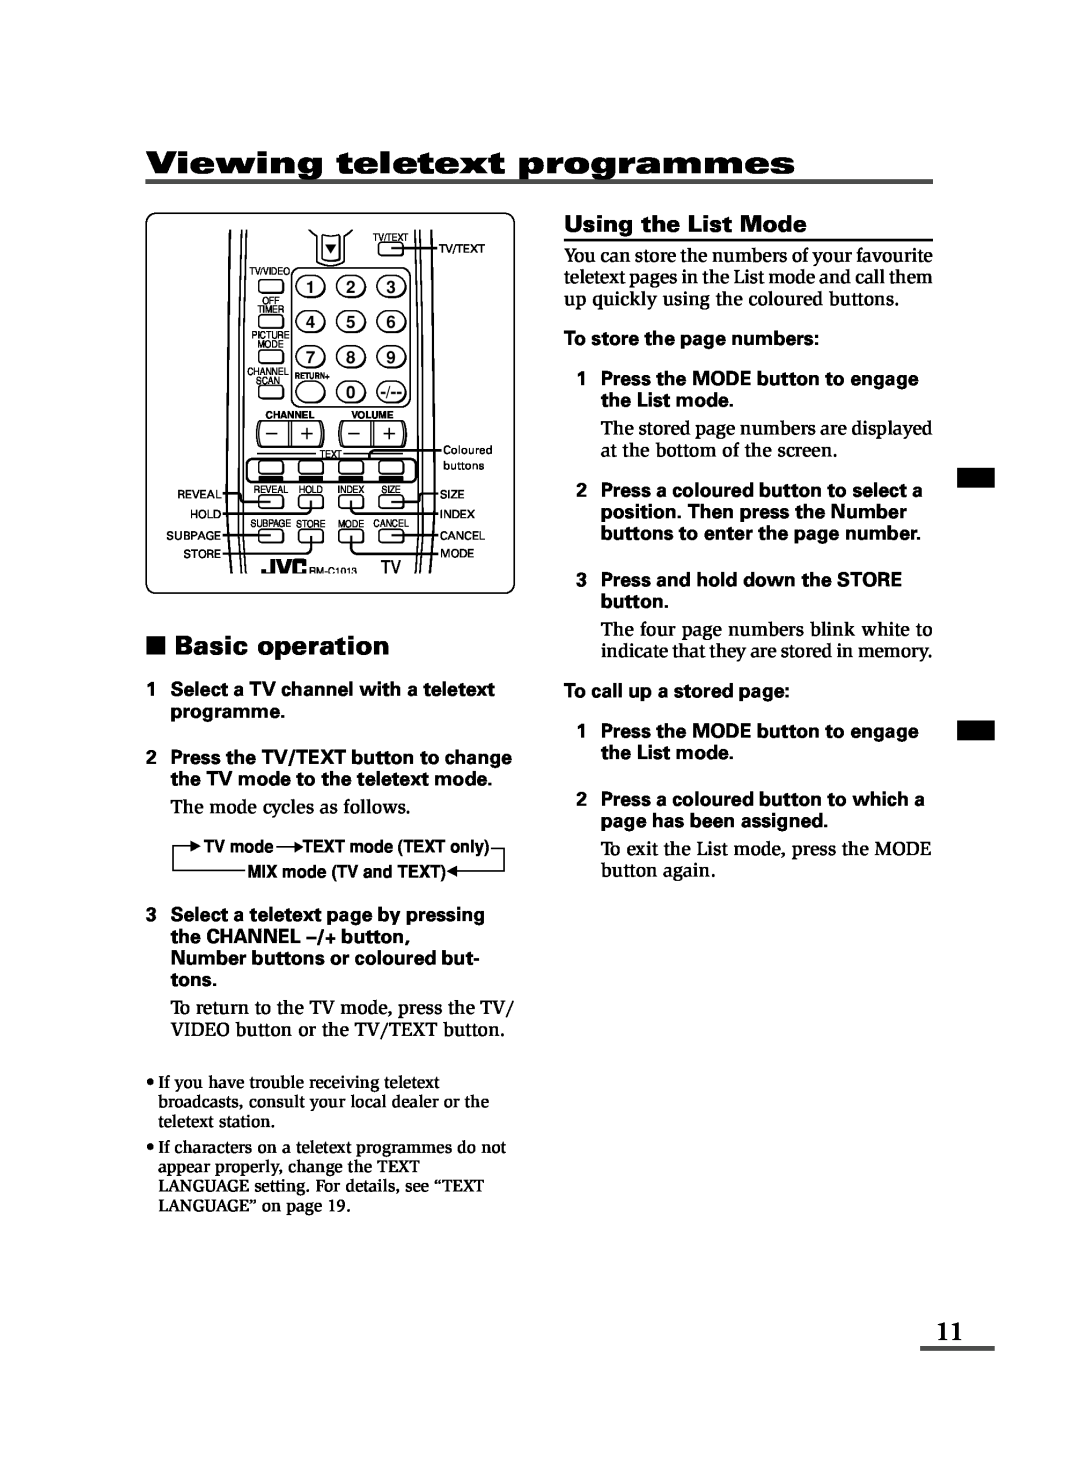 JVC specifications Viewing teletext programmes, Basic operation, Using the List Mode, Channel 